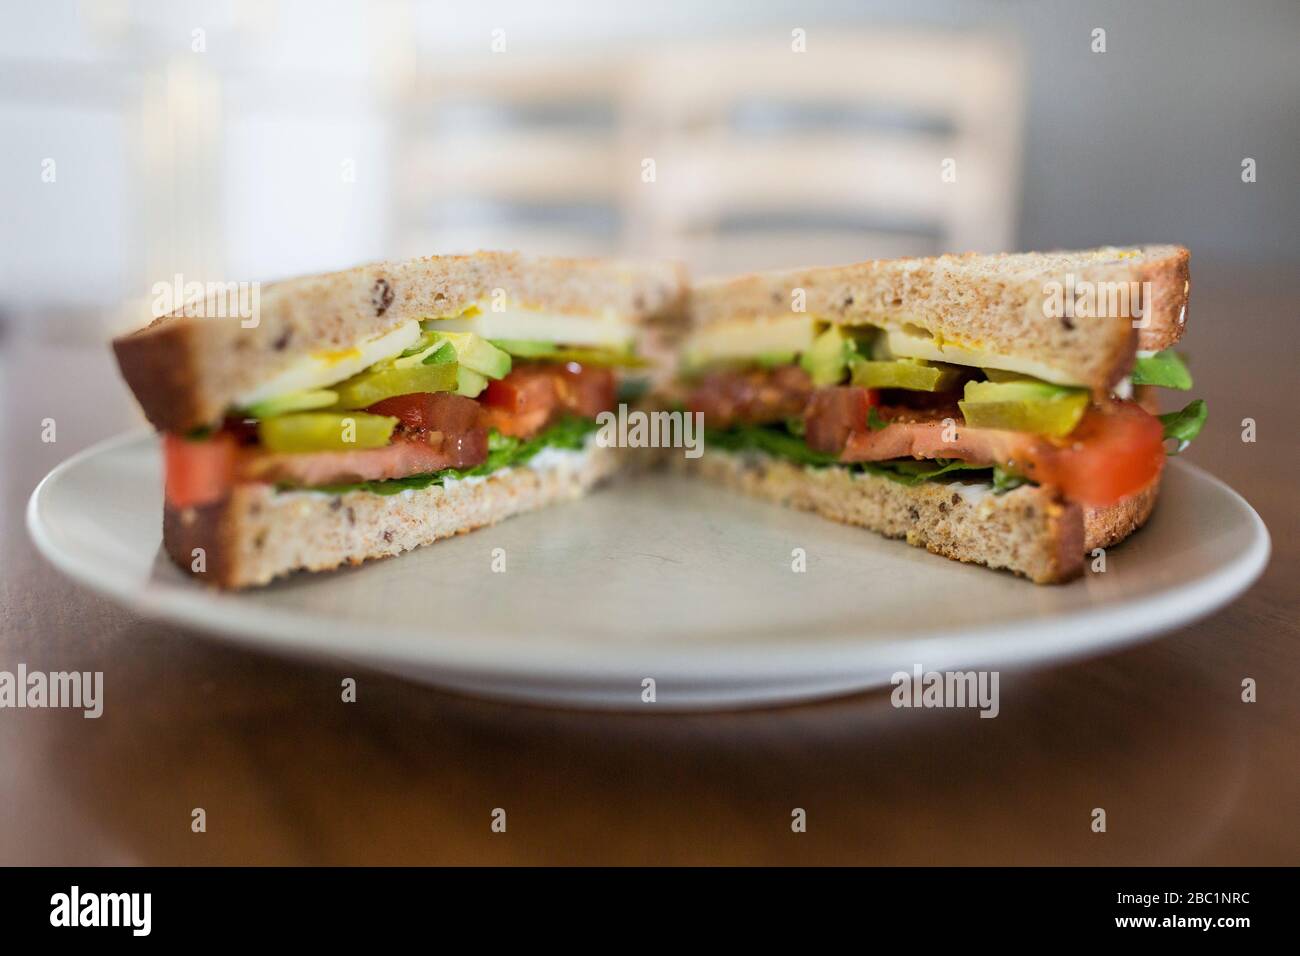 A vegetarian sandwich with avocado and tomato on whole wheat bread ready for a healthy, delicious lunch. Stock Photo